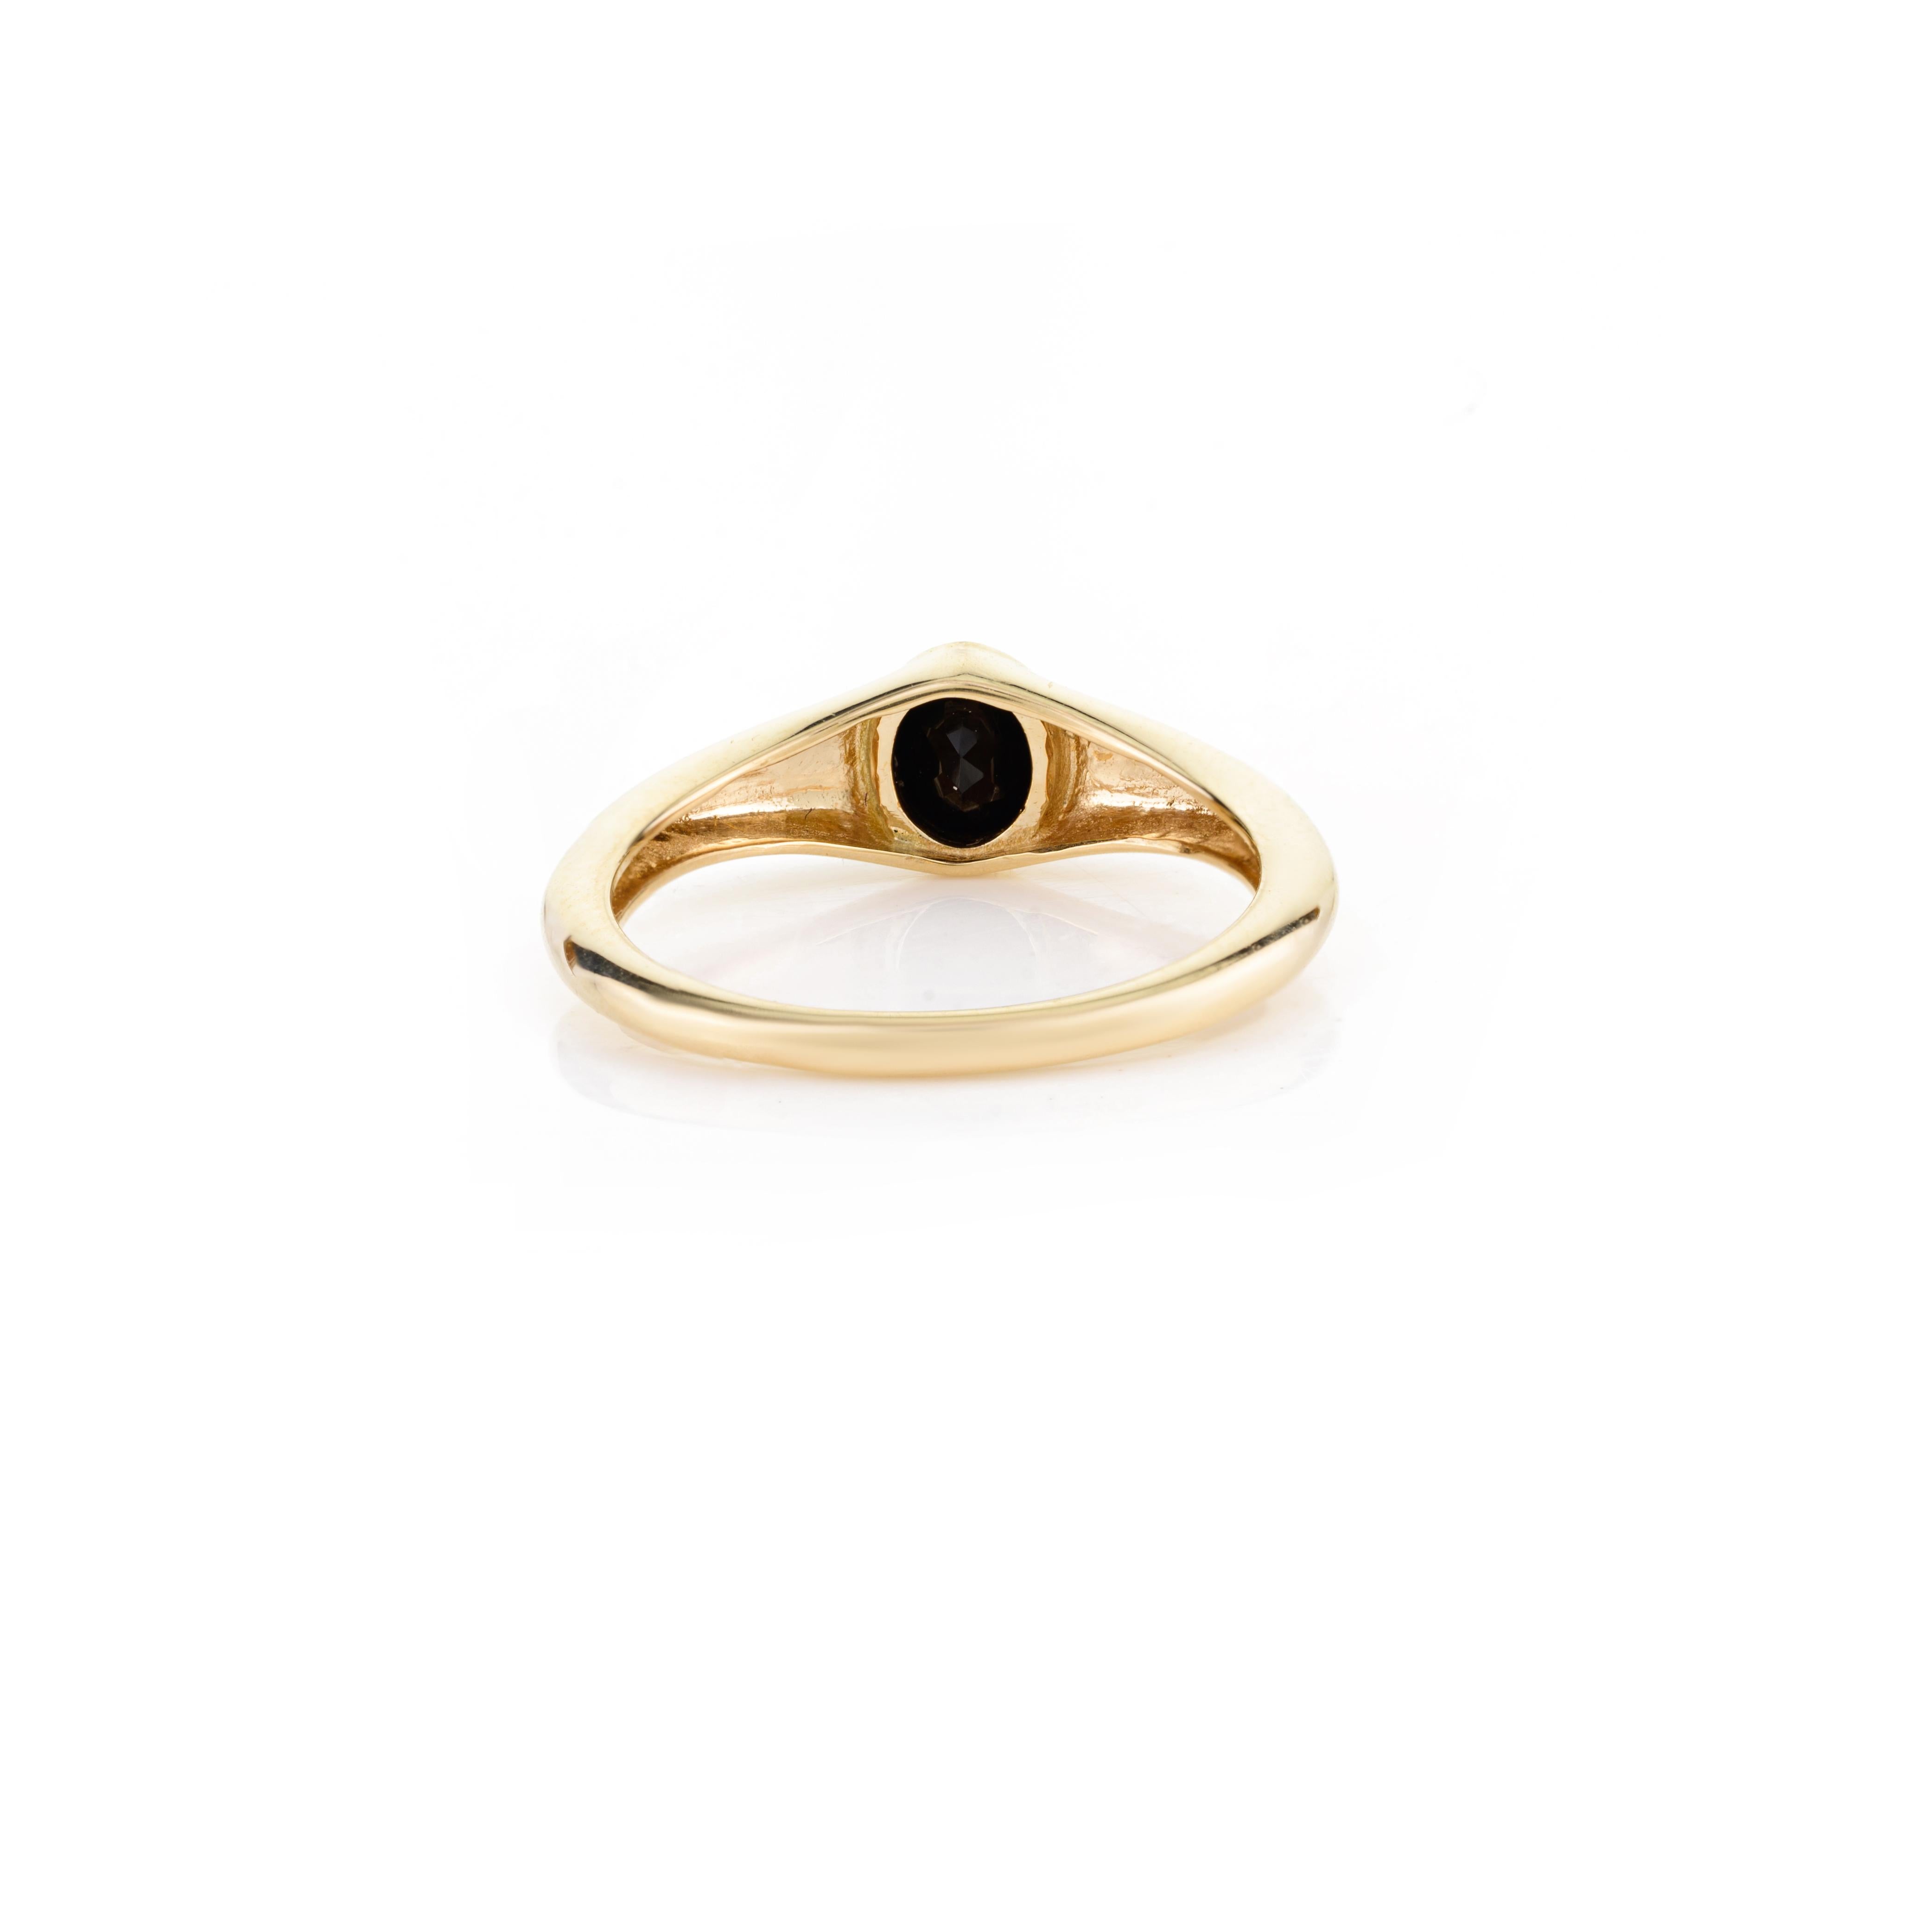 For Sale:  Unisex 14k Solid Yellow Gold Black Onyx Promise Everyday Ring 7